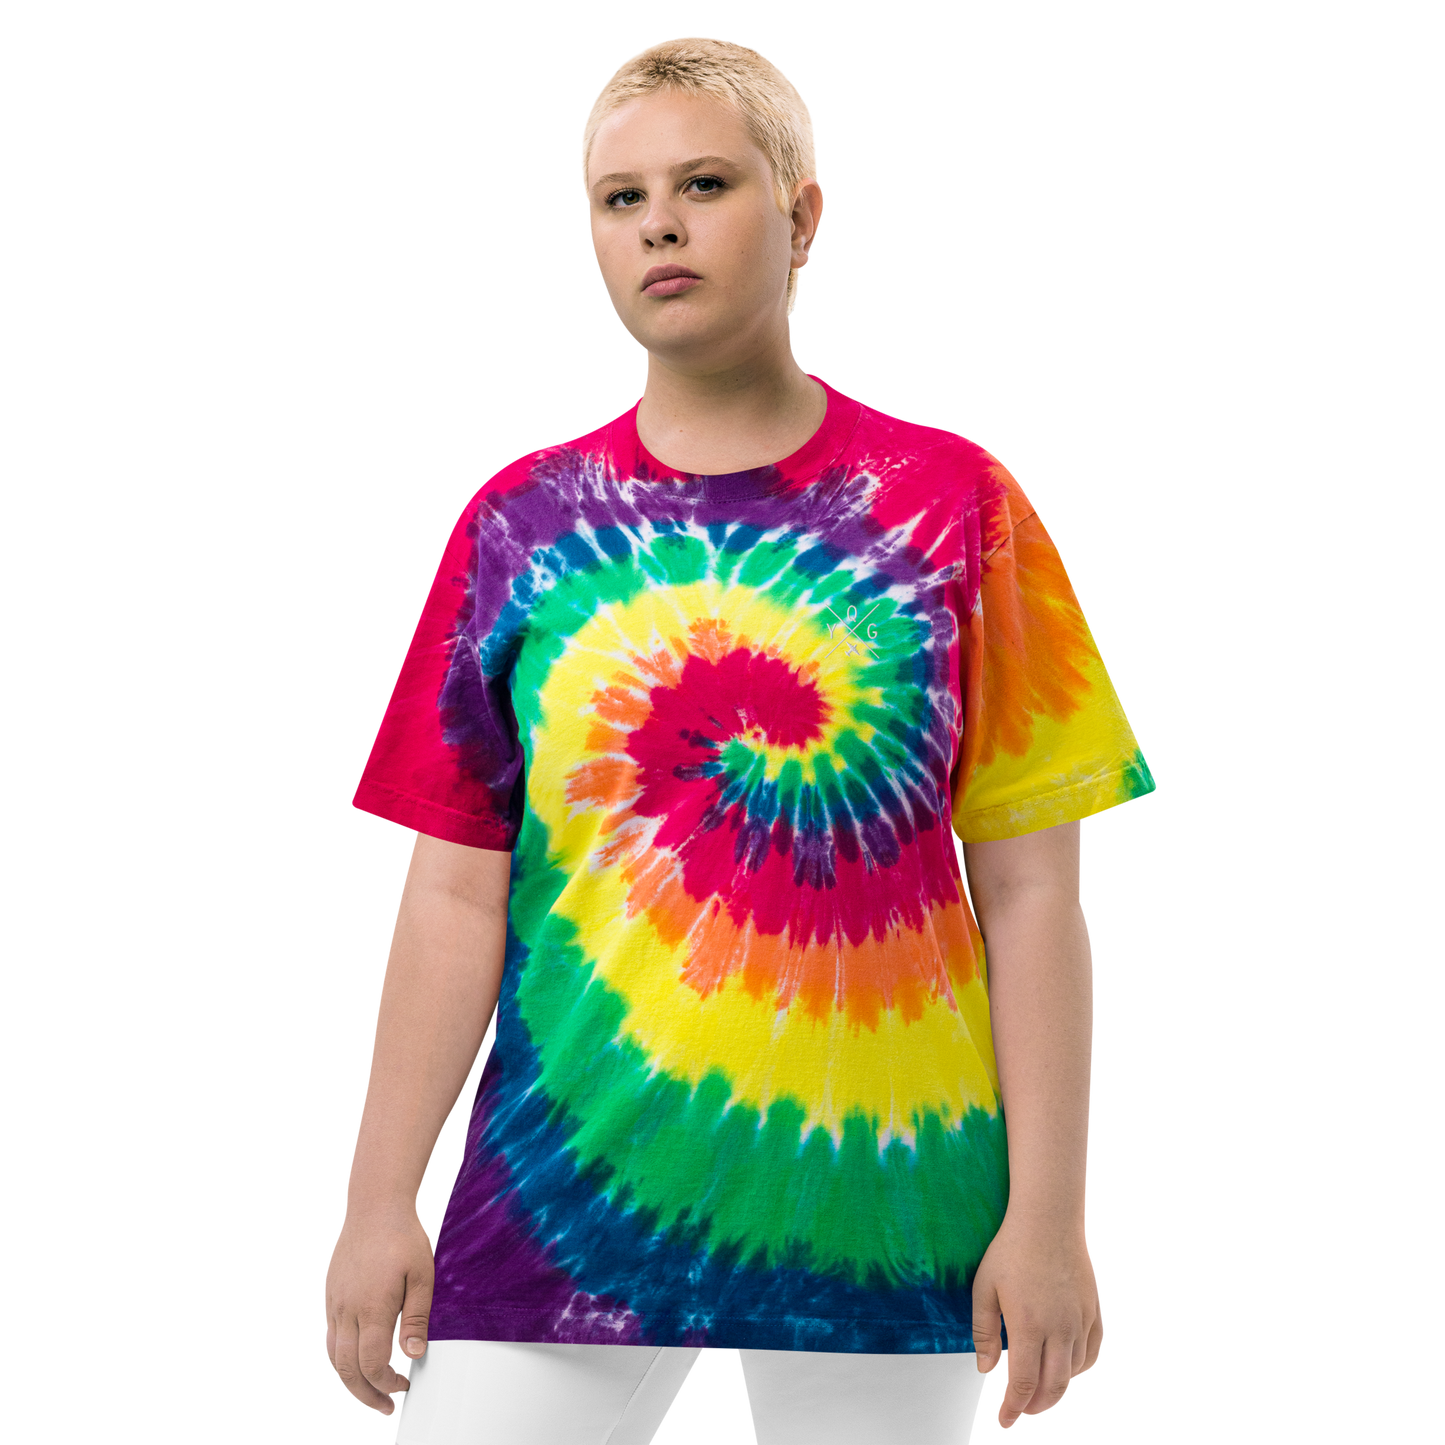 YHM Designs - YQG Windsor Oversized Tie-Dye T-Shirt - Crossed-X Design with Airport Code and Vintage Propliner - White Embroidery - Image 01